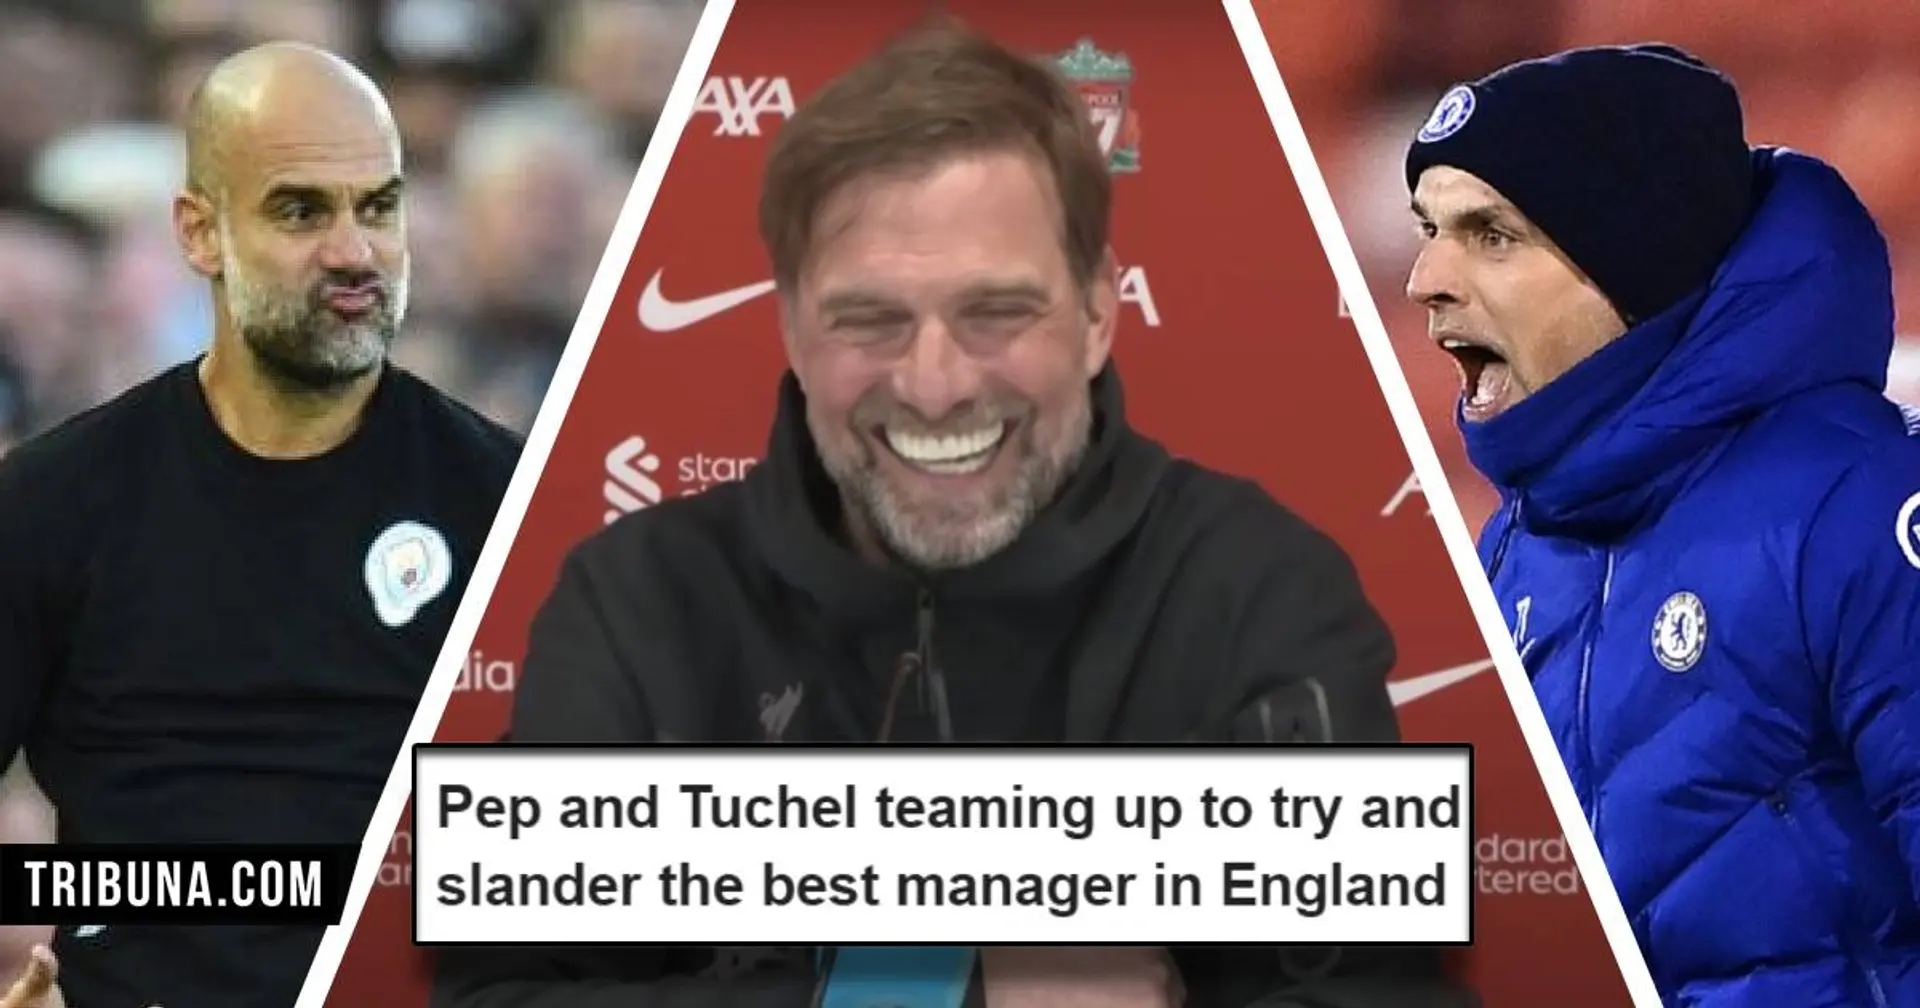 'Tuchel and Pep are both deluded': Fans react to managers' comments on 'everyone supporting Liverpool'